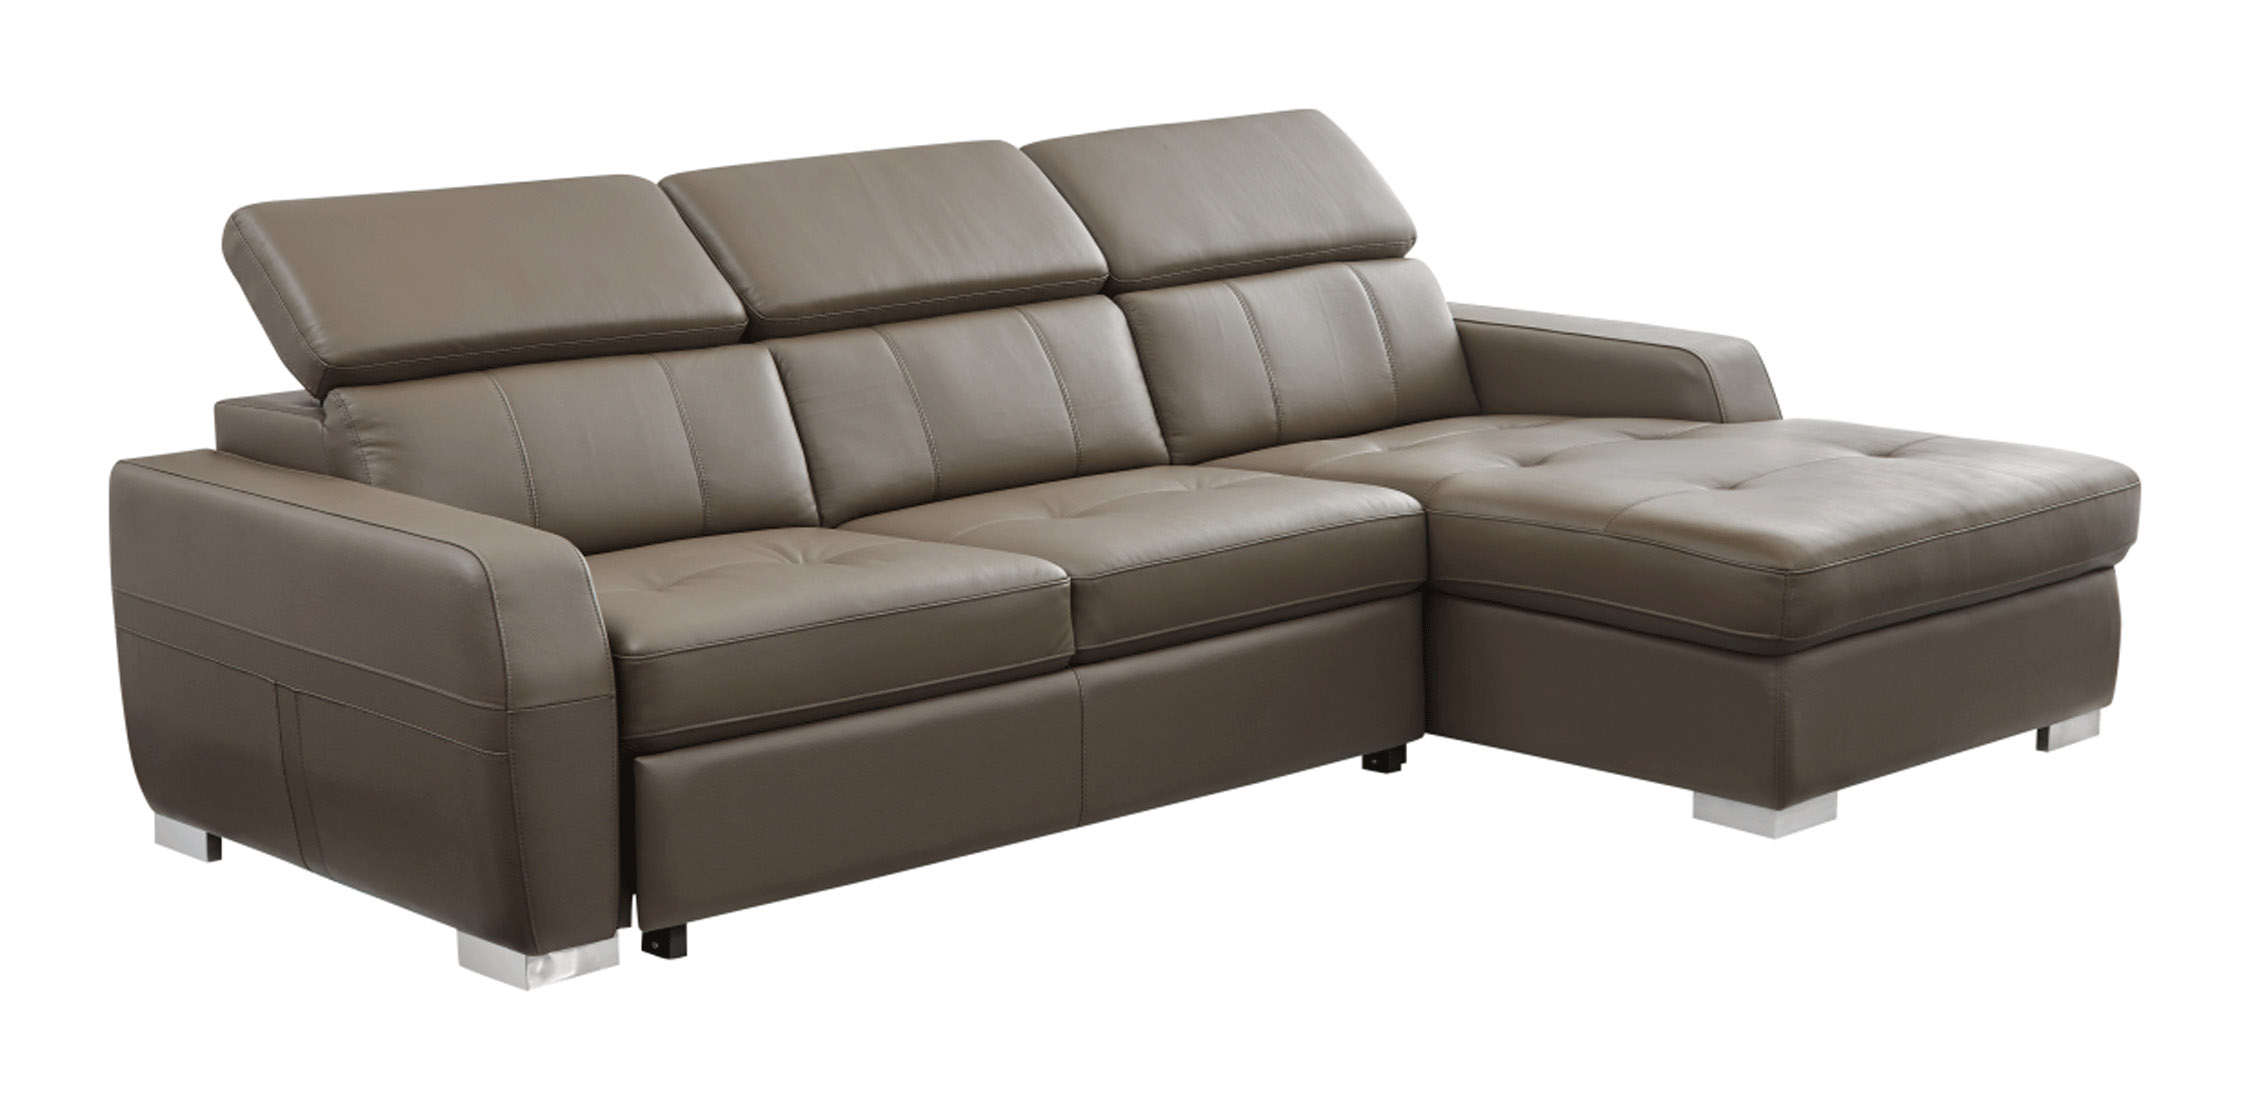 Stylish Sectional with Chrome Legs High Quality Leather